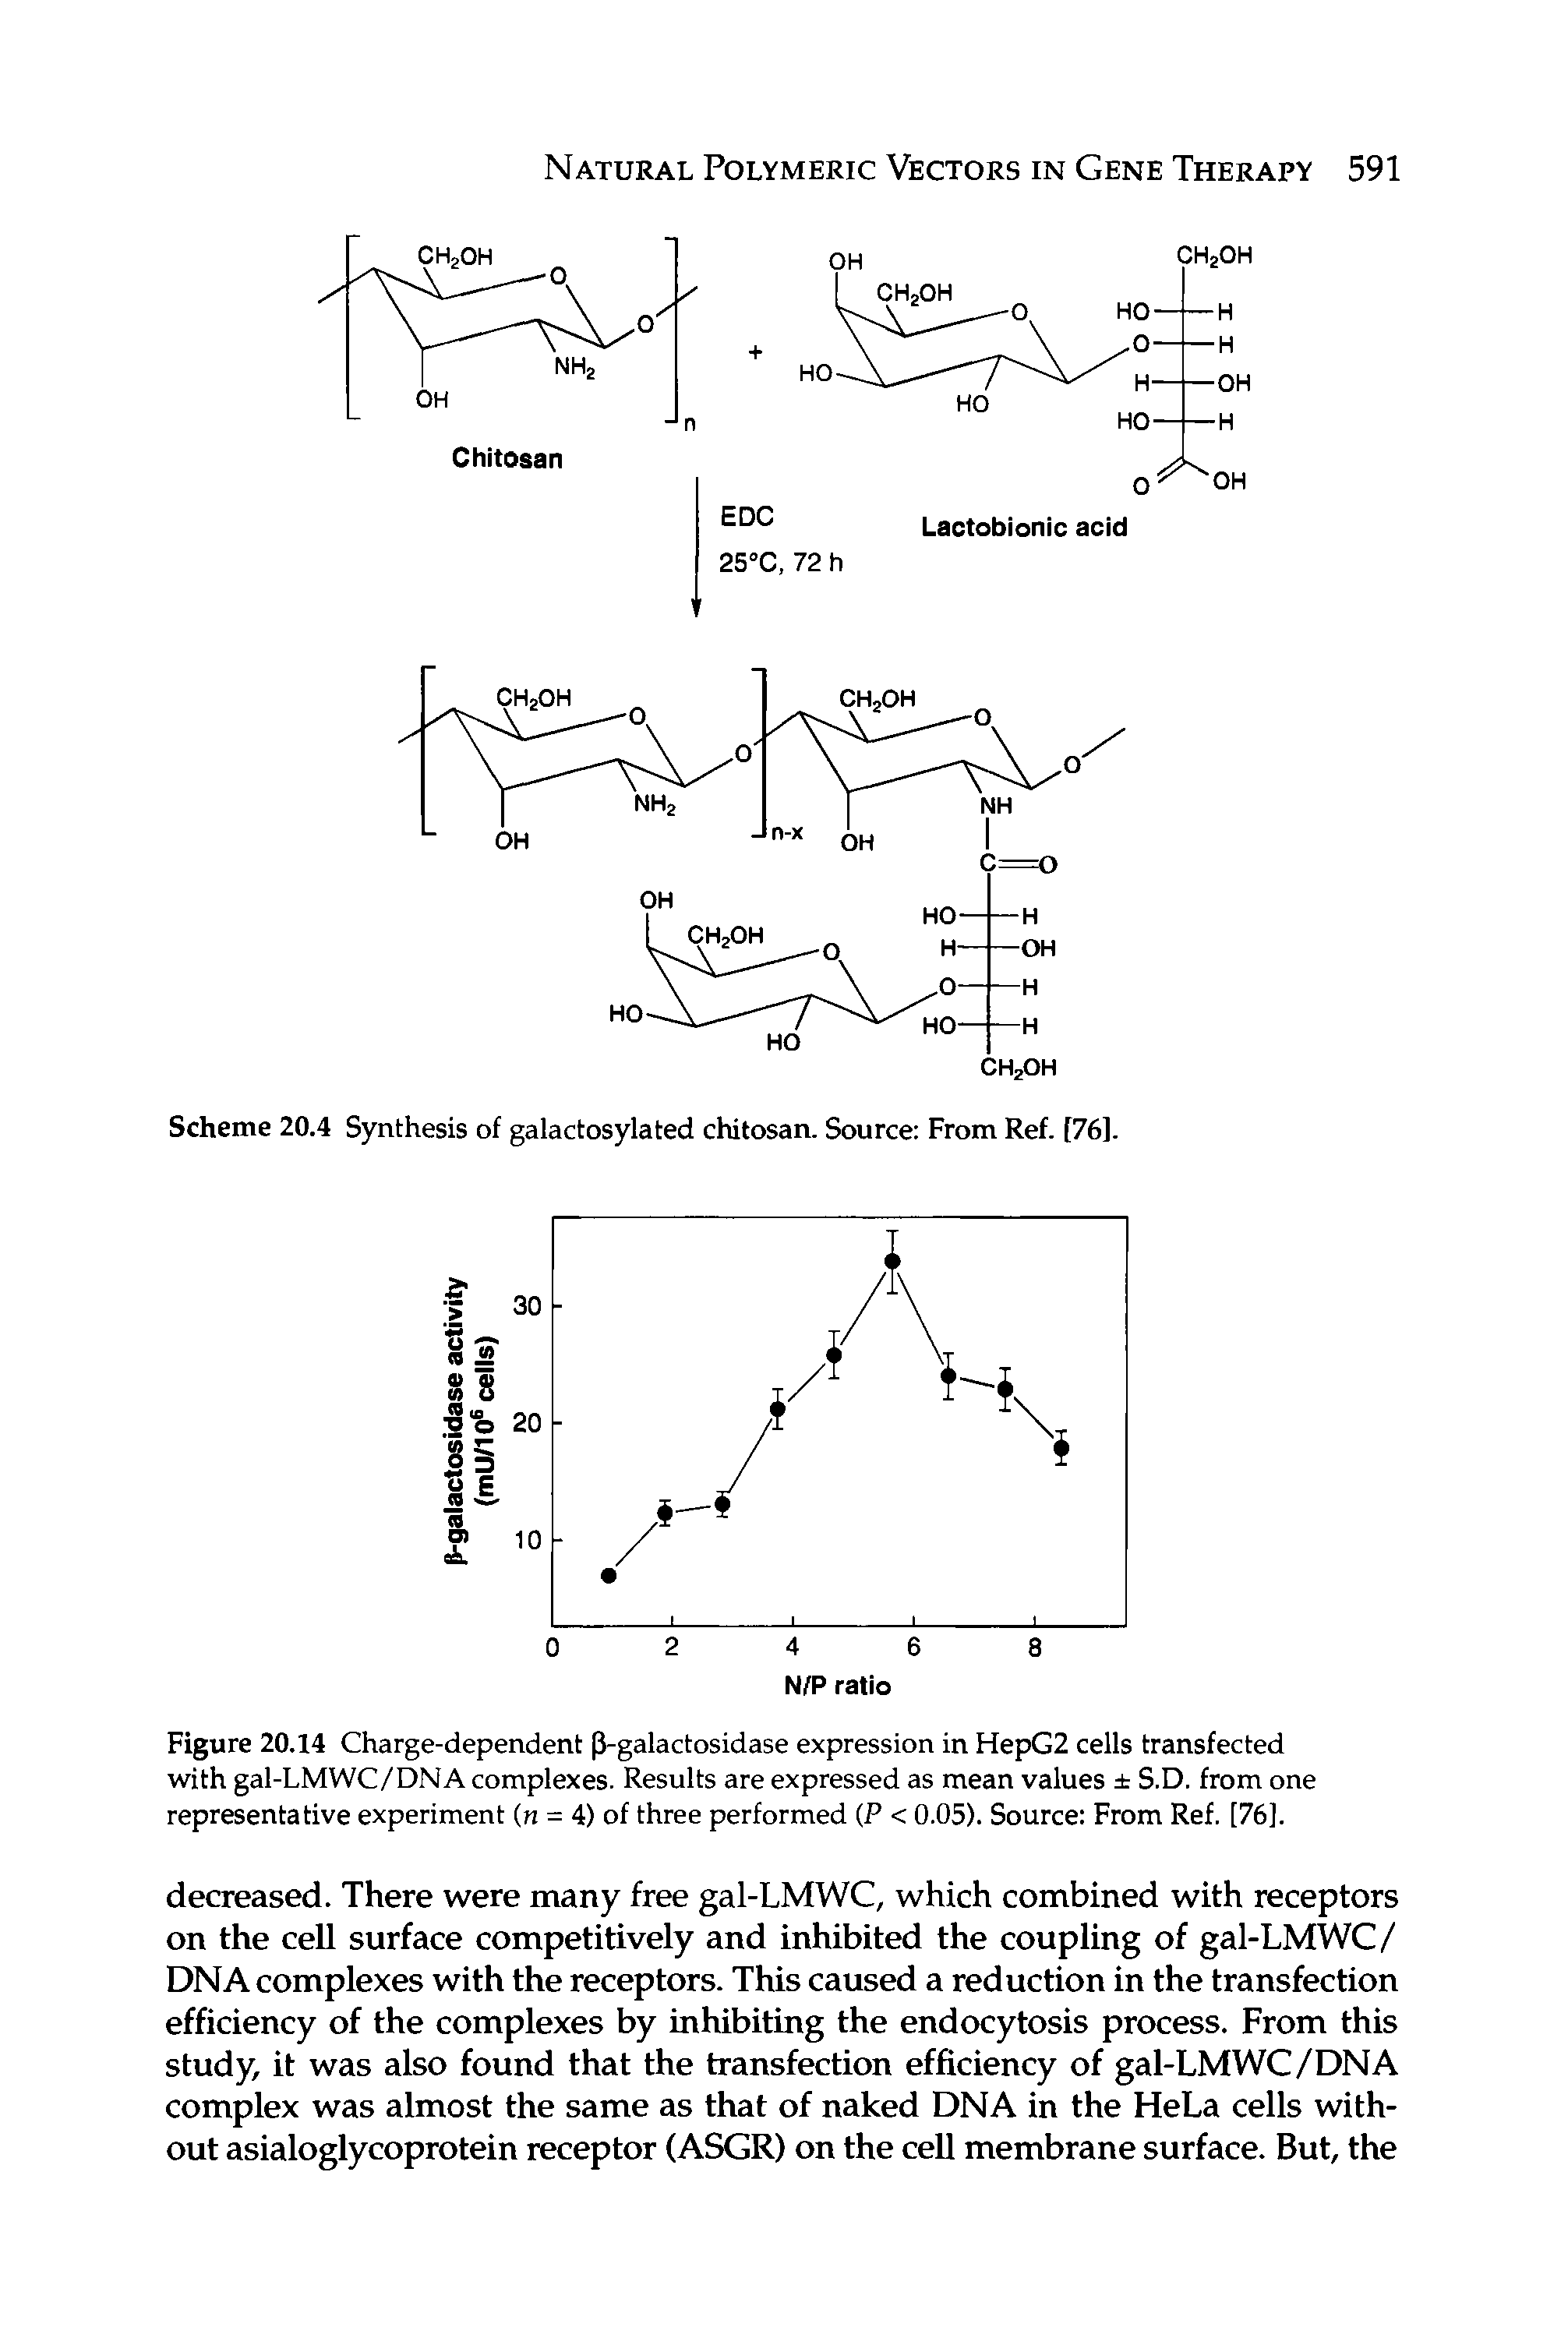 Scheme 20.4 Synthesis of galactosylated chitosan. Source From Ref. [76].